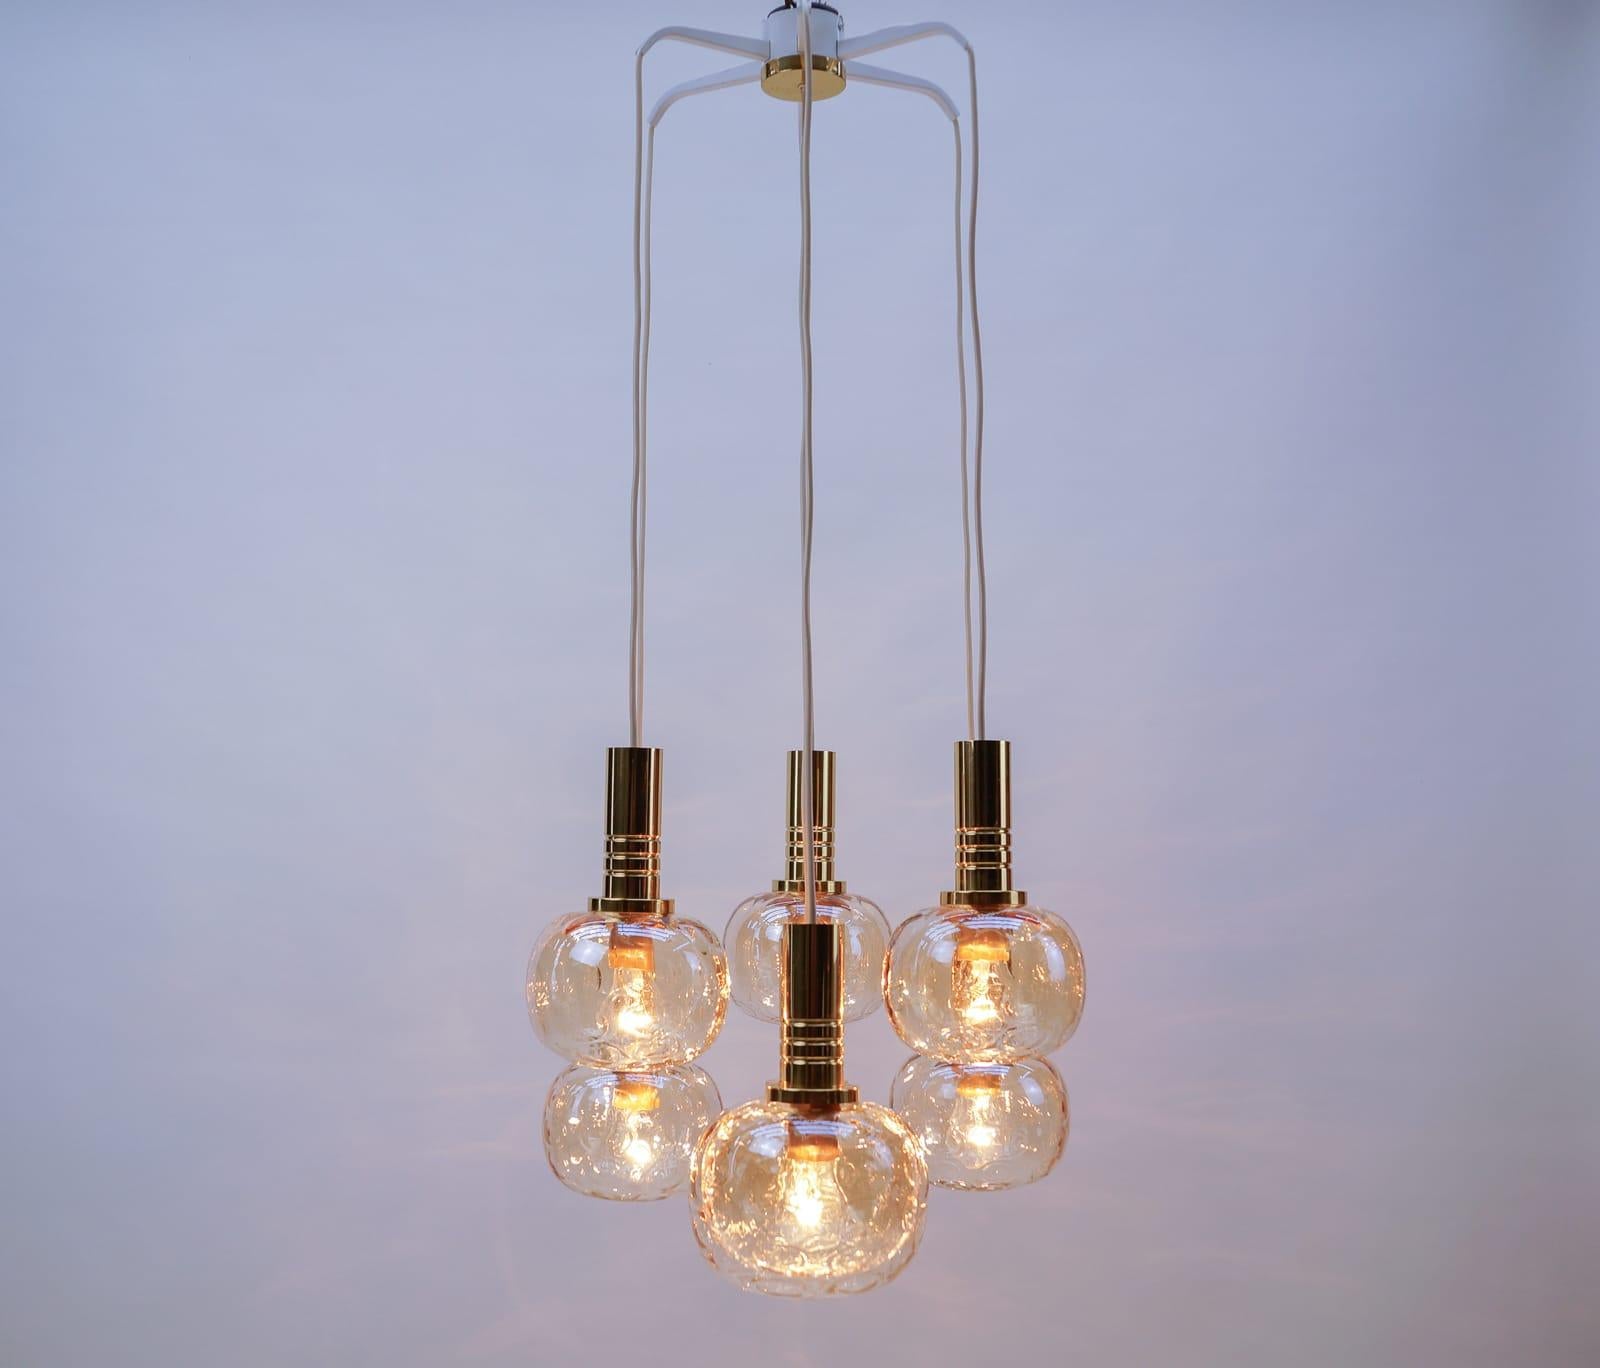 This ceiling lamp features a small frame with seven cascading glass elements with one E27 and six E14 bulb sockets.

Fully functional.

Seven E27 sockets. Works with 220V and 110V.

Wiring is suitable for all countries.